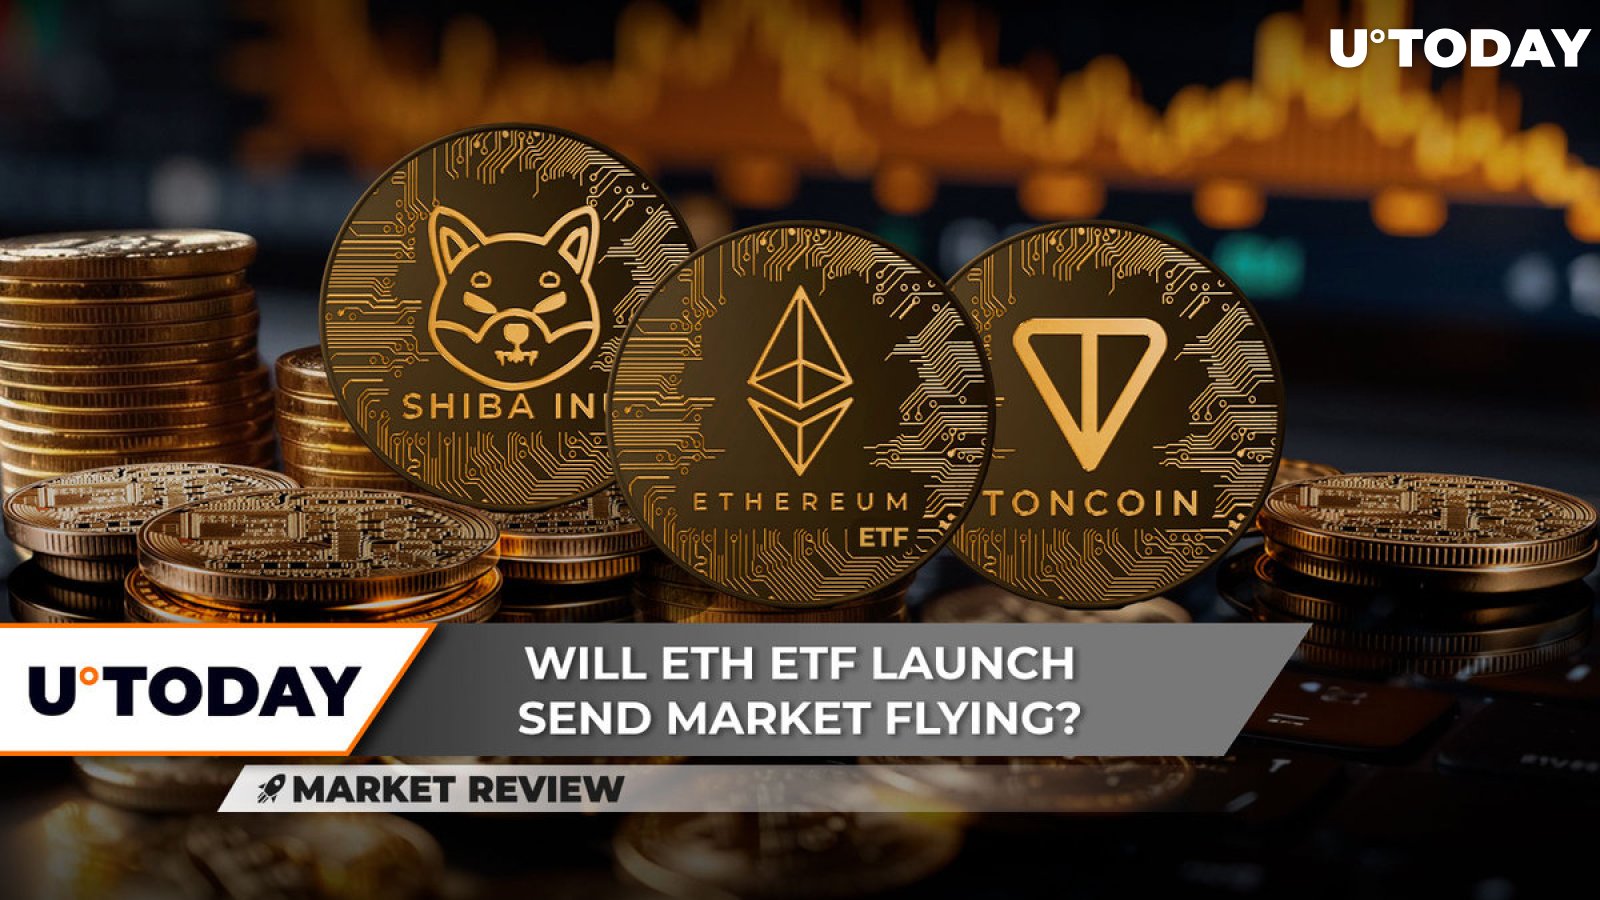 Shiba Inu (SHIB): Things Are Getting Ugly, $1 Billion Ethereum (ETH) ETF Launch Doesn't Help, Toncoin (TON) Can't Drop Below $6.60